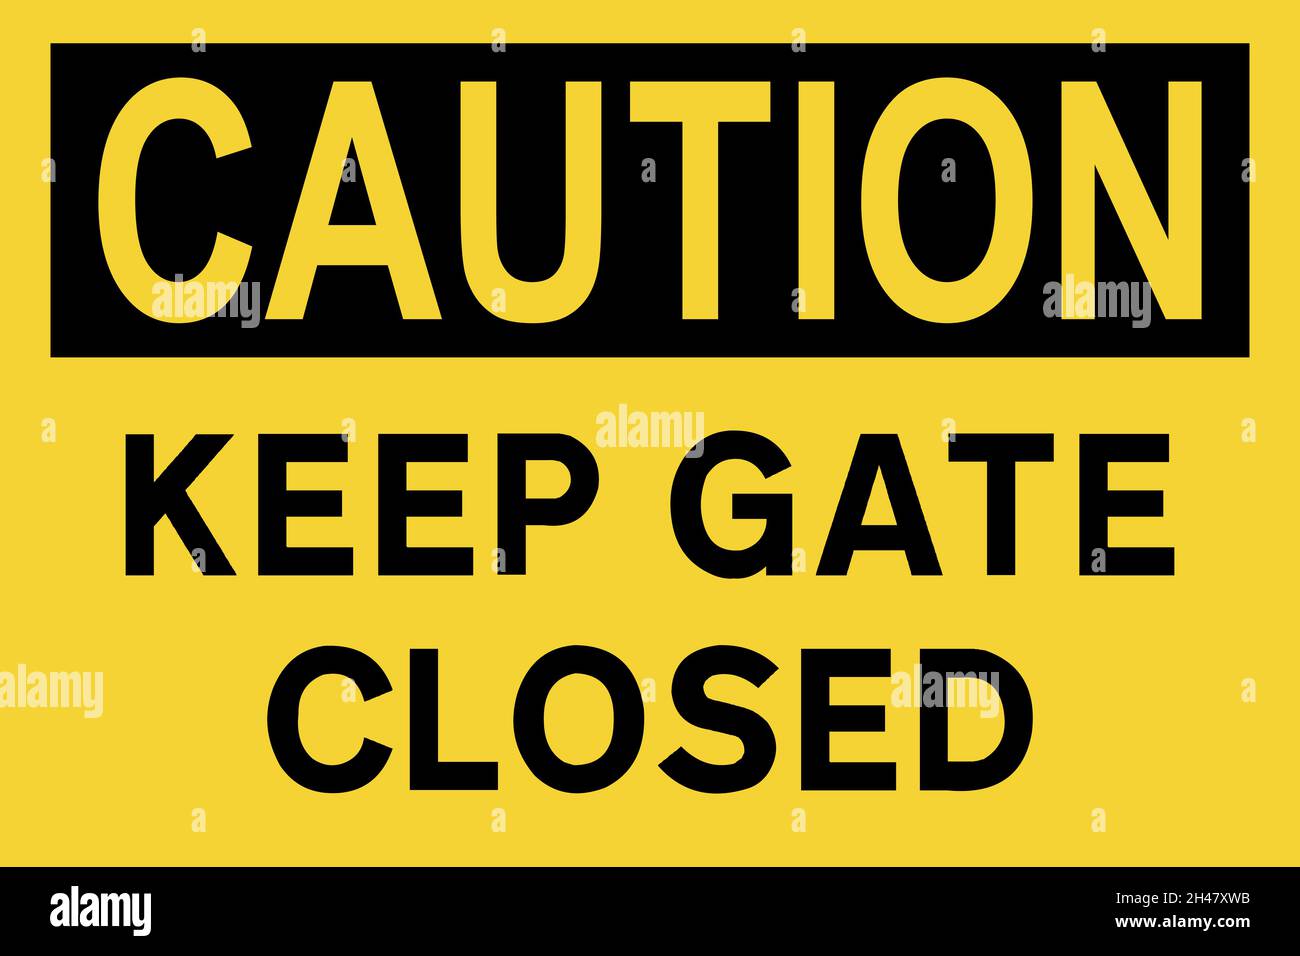 Keep gate closed caution sign. Black on yellow background. Construction safety signs and symbols. Stock Vector